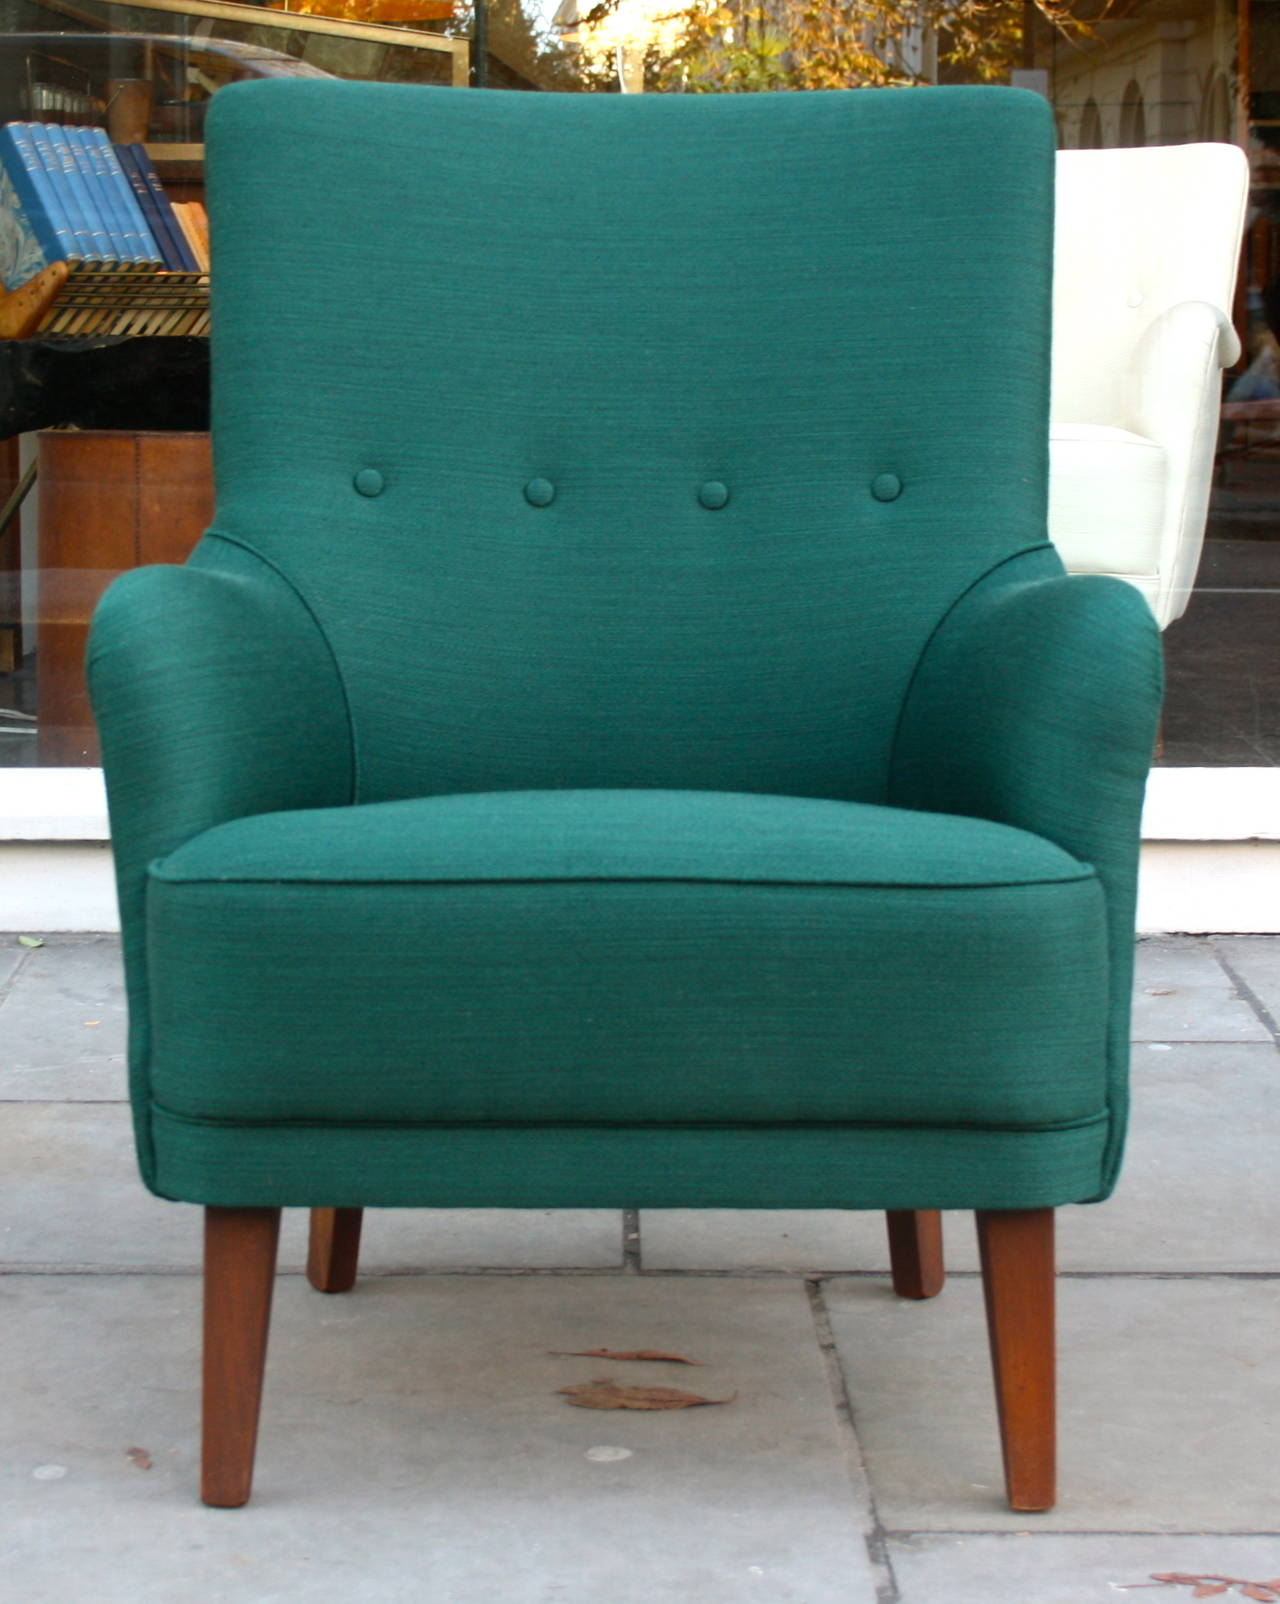 Great small scale highback armchair by Peter Hvidt . Very comfortable and in perfect condition.